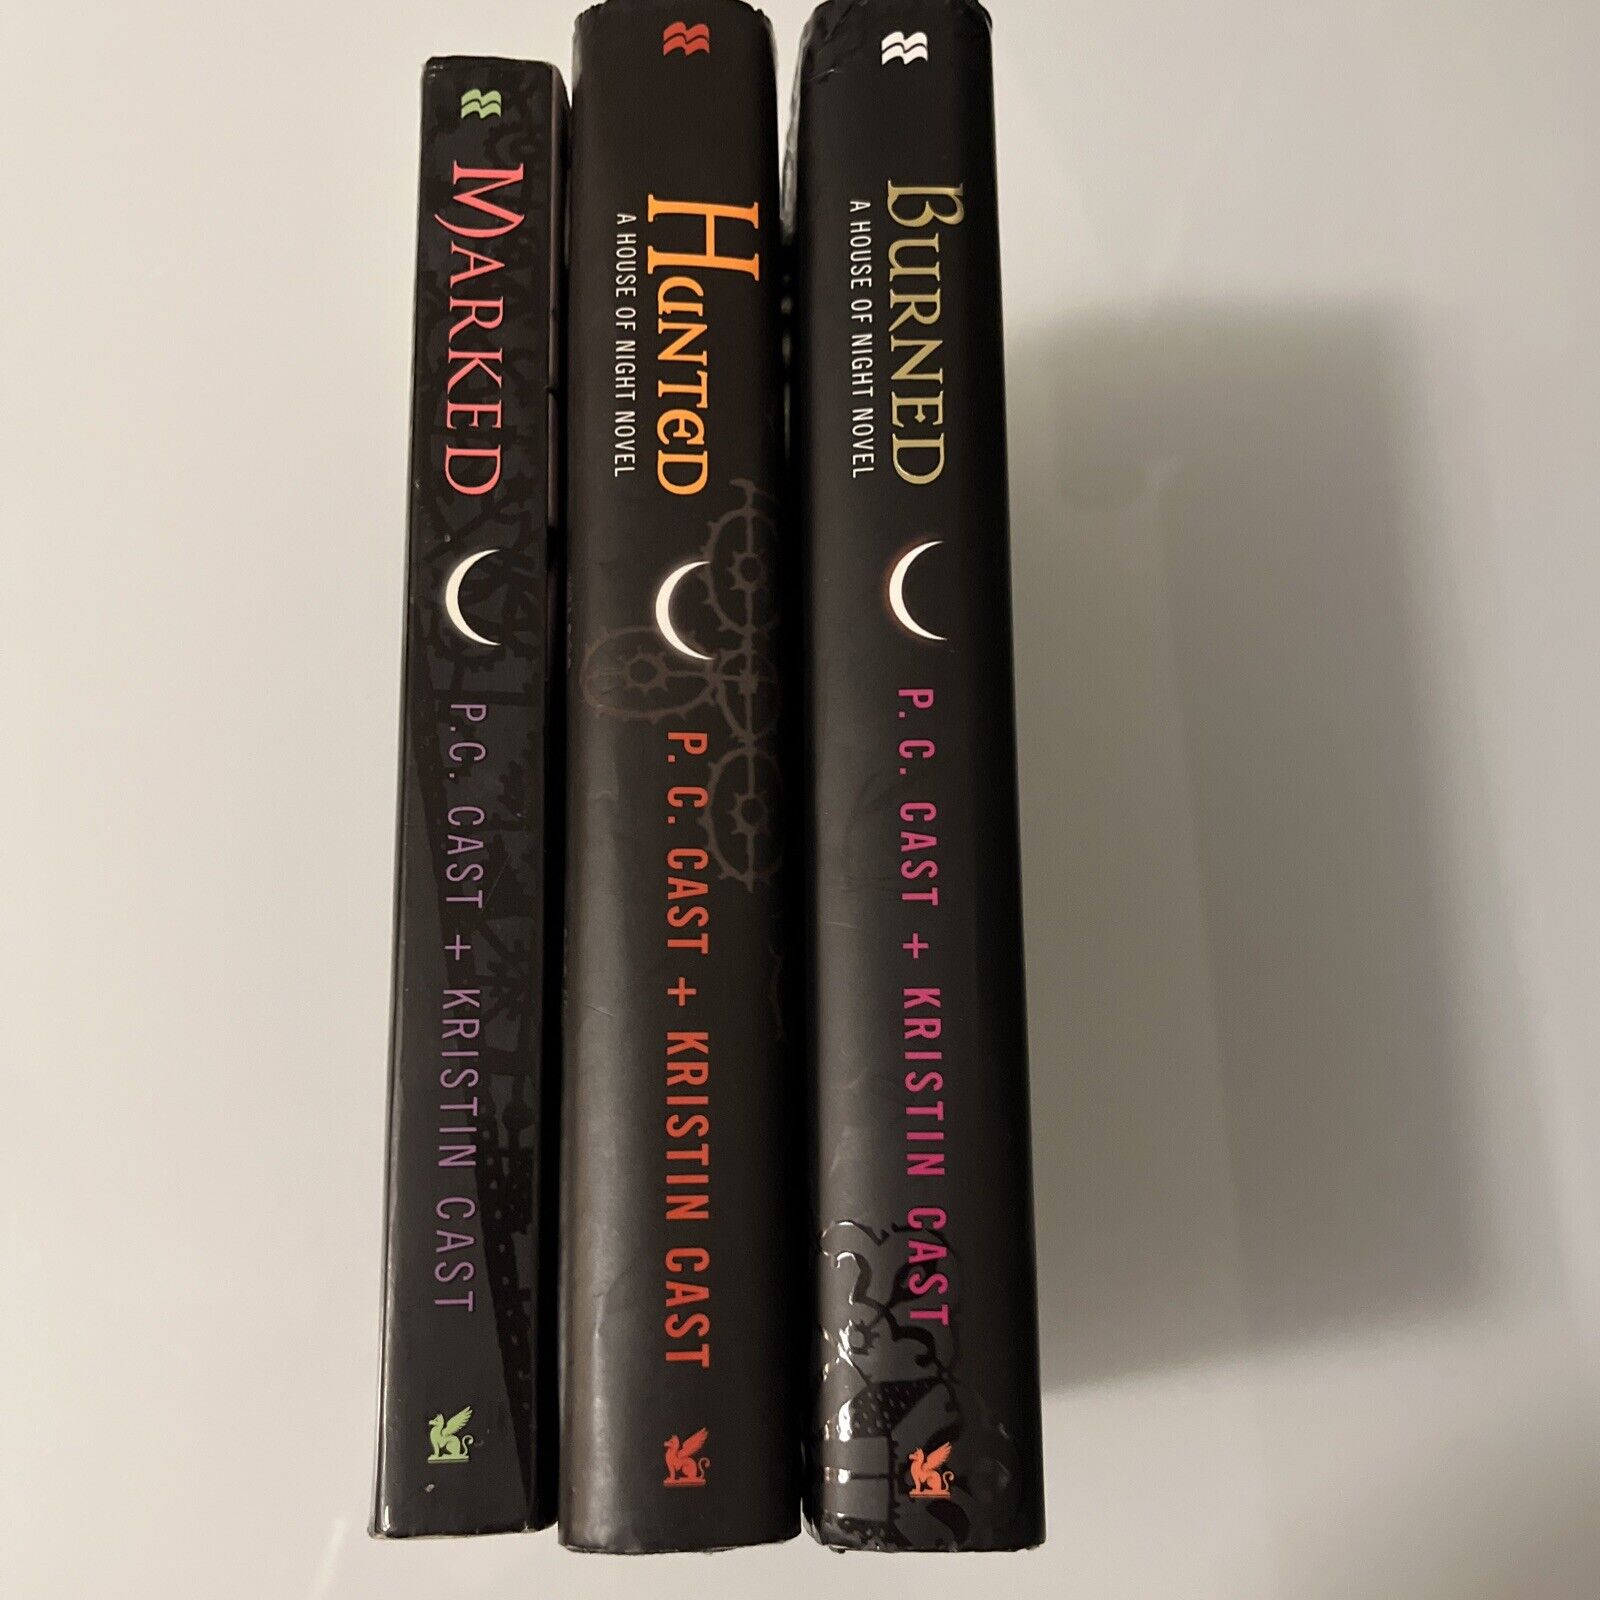 Lot: 3 HOUSE OF NIGHT novel by PC Cast Vampire Books BURNED, HUNTED, MARKED